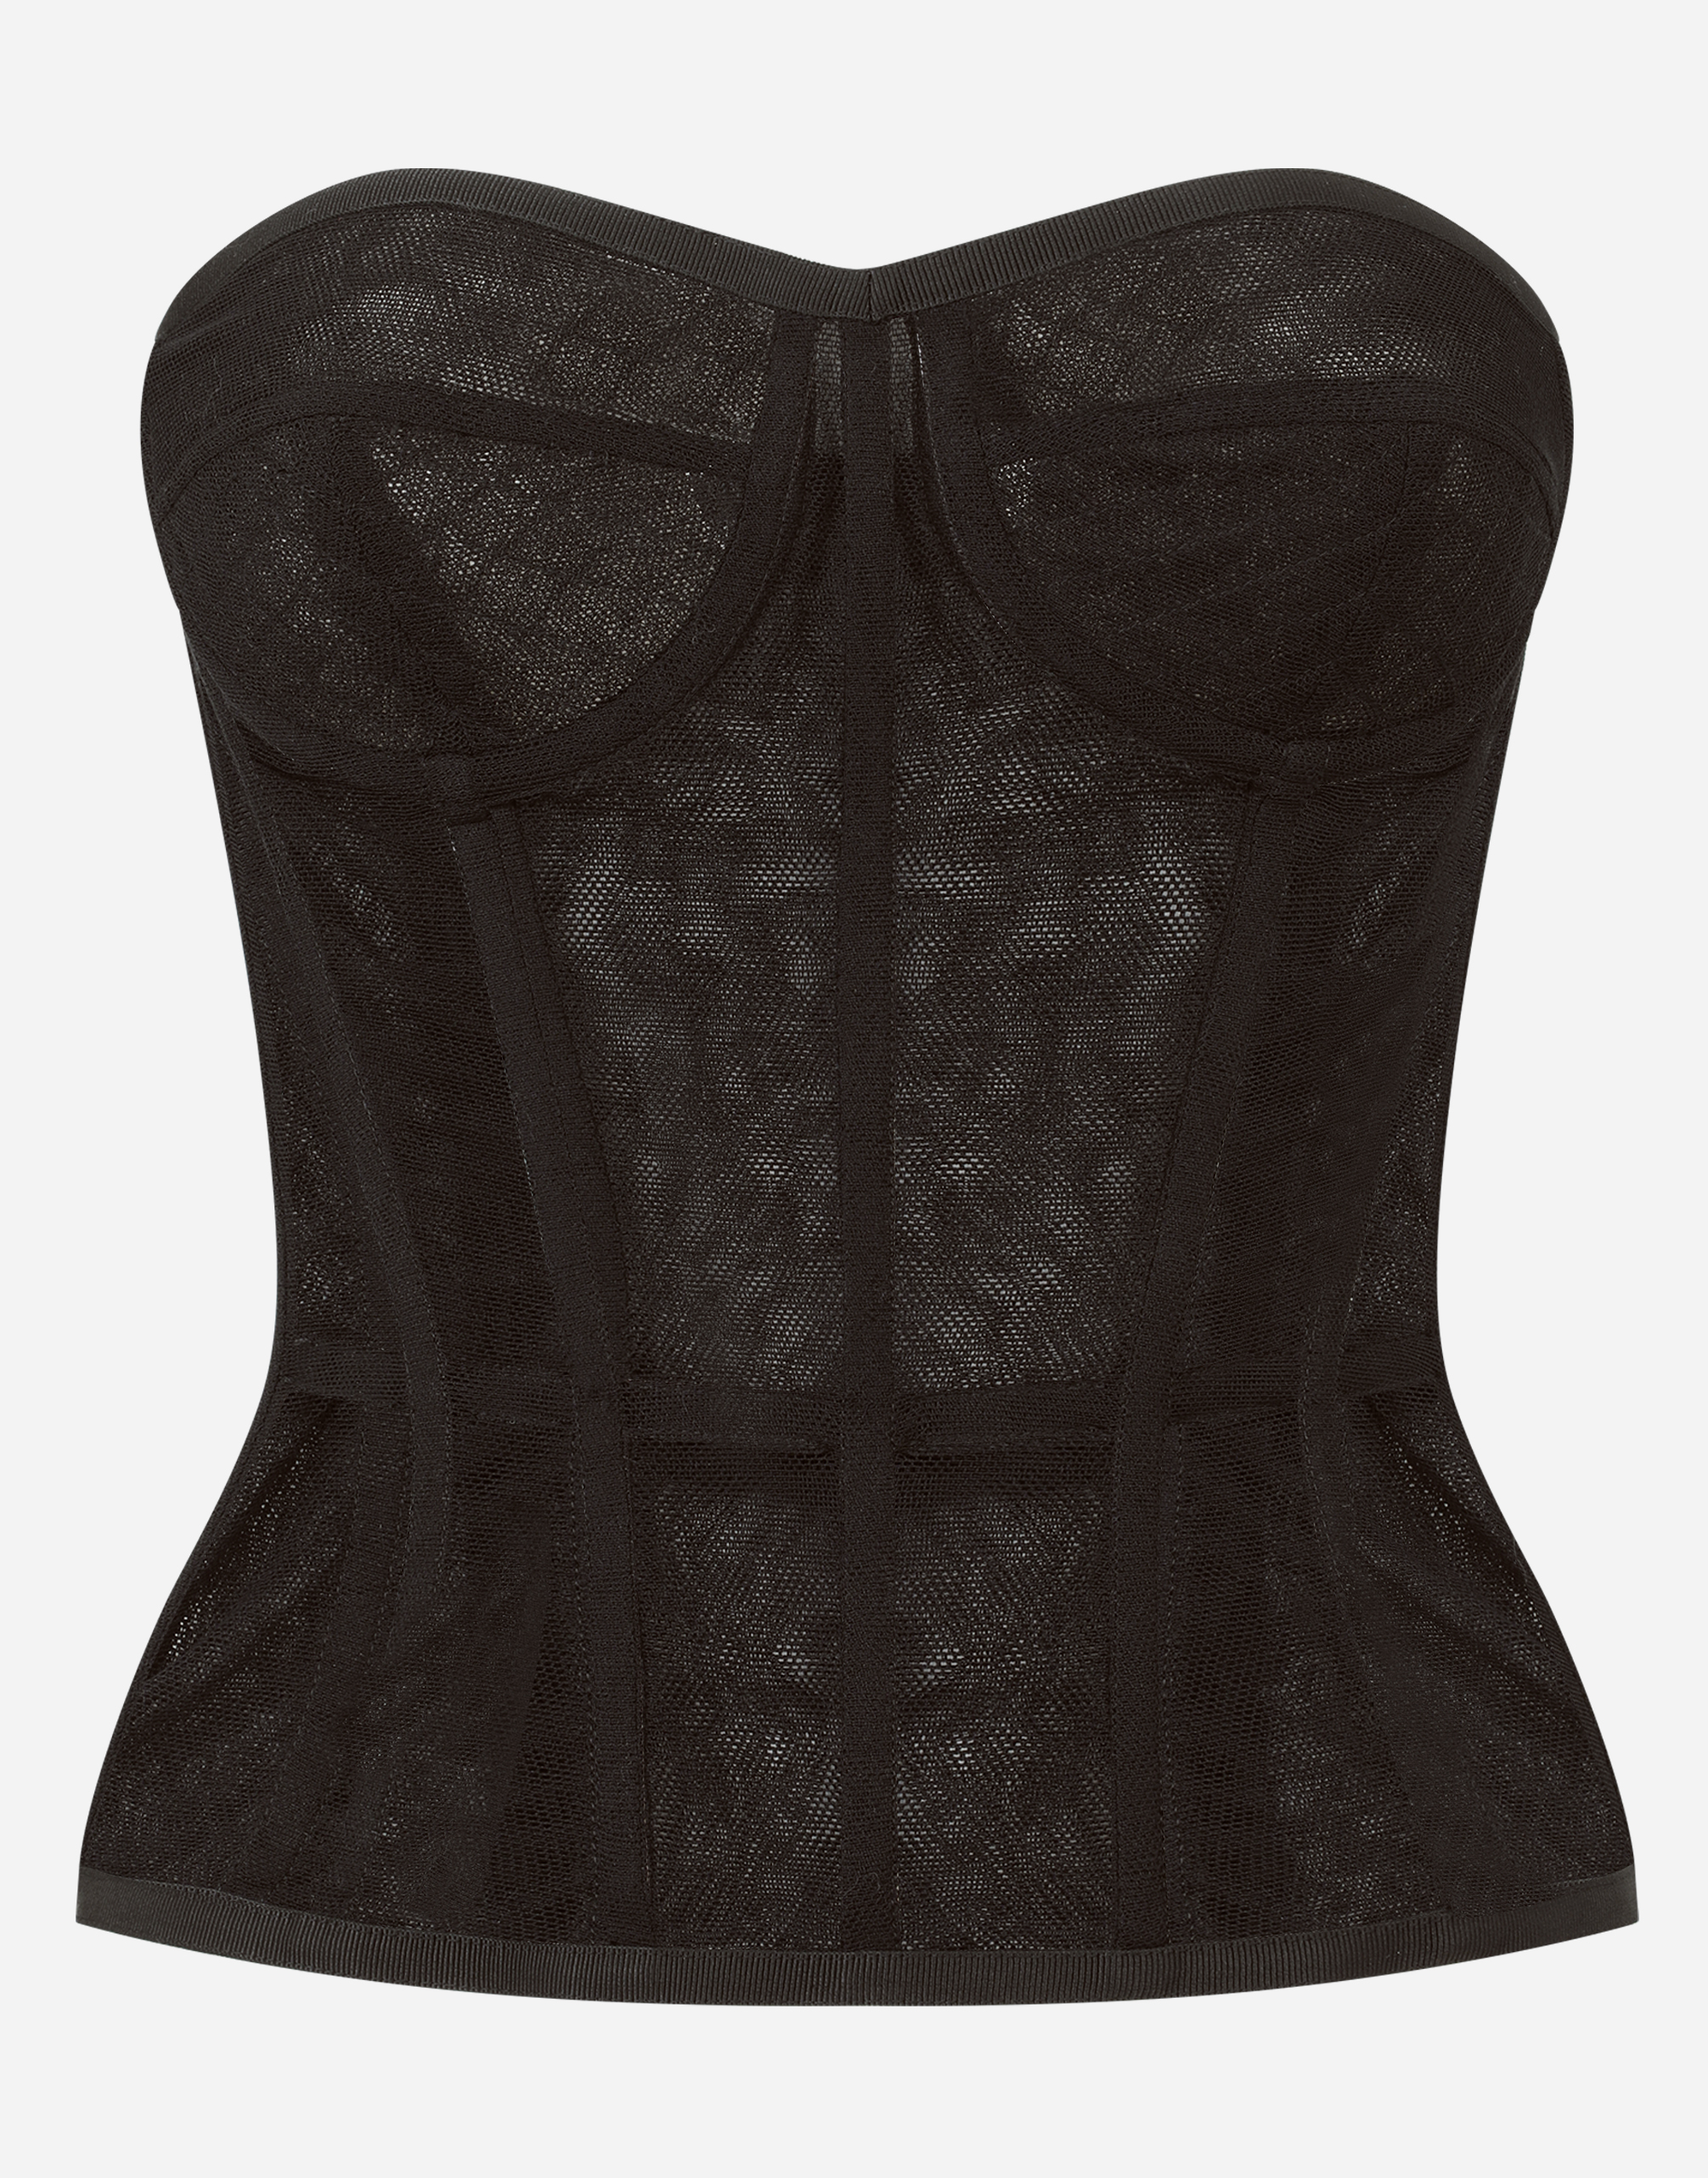 DOLCE & GABBANA COTTON TULLE BUSTIER TOP